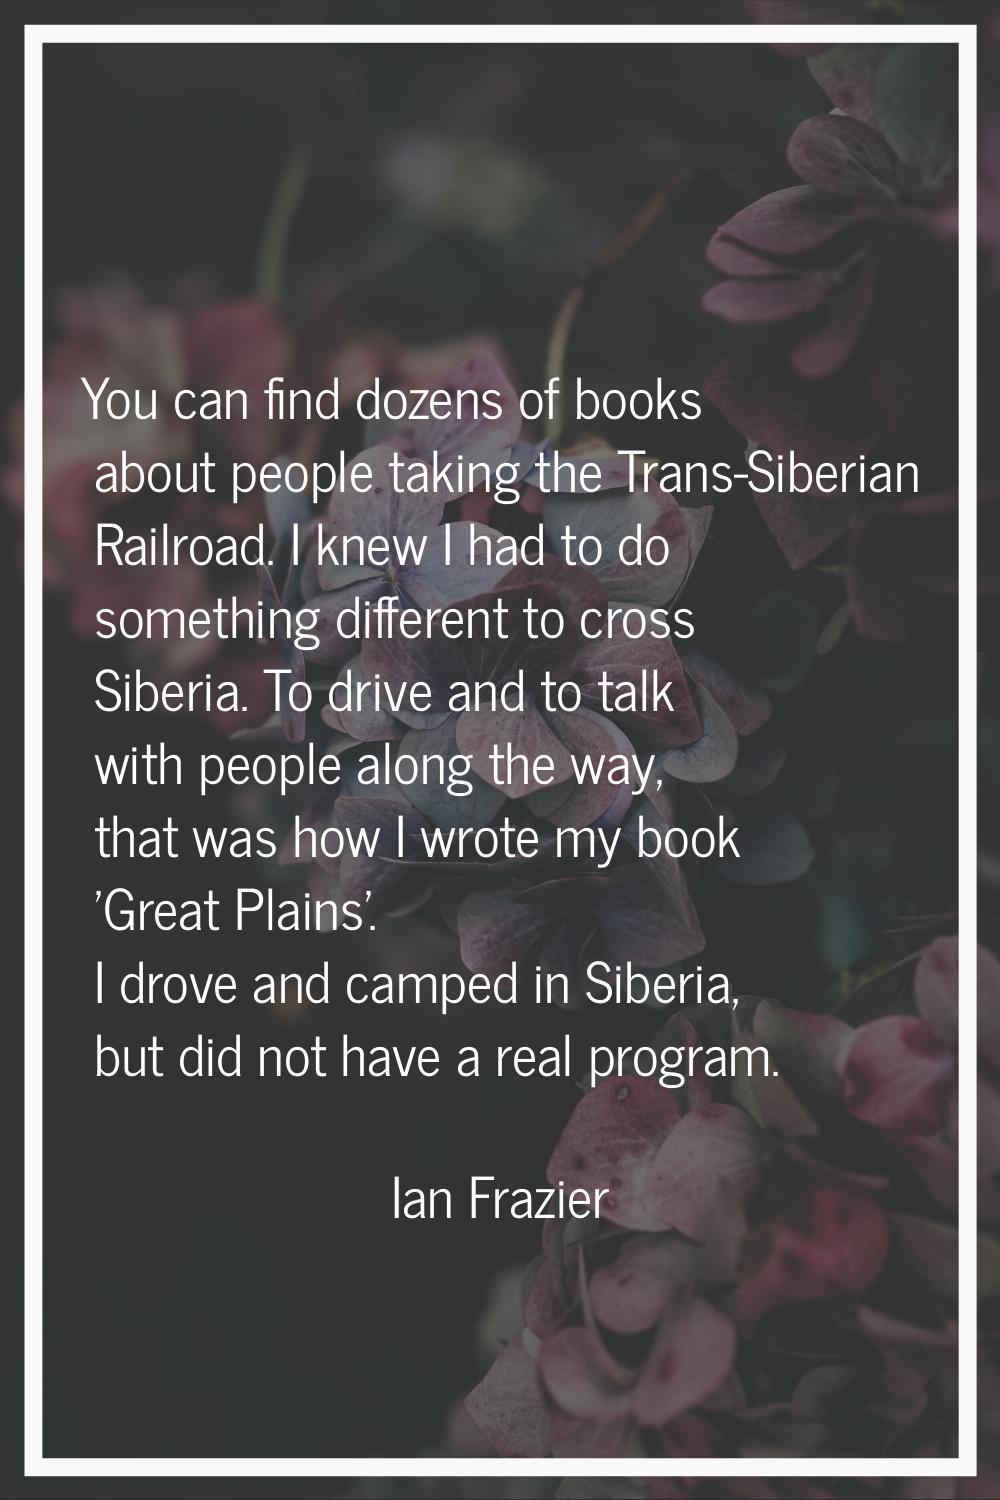 You can find dozens of books about people taking the Trans-Siberian Railroad. I knew I had to do so